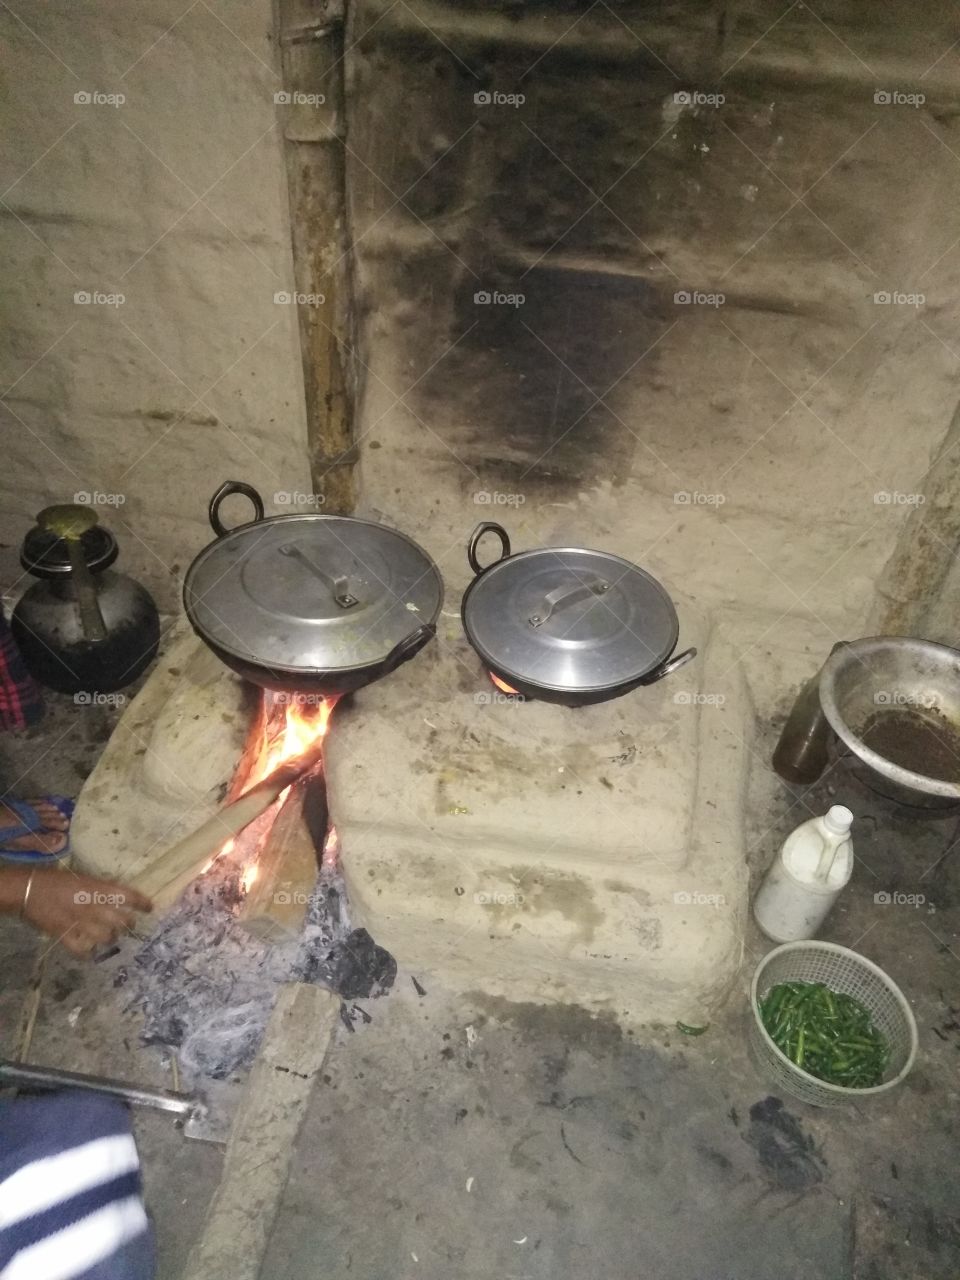 Traditional cooking at country,  Cooking with firewood,  Mud made kitchen Stove